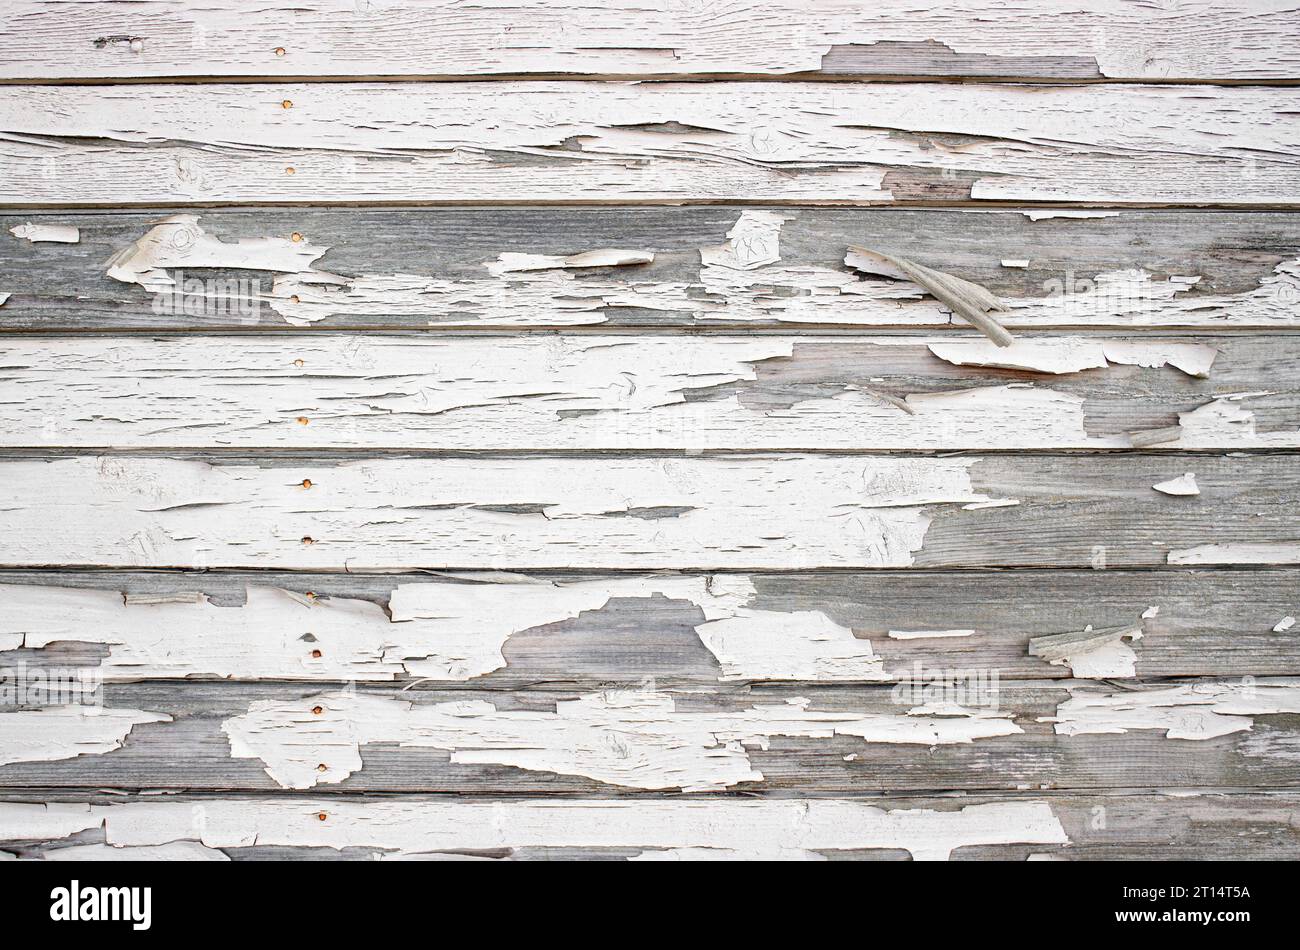 Rough crackled paint on wooden boards, white color paint peeling off, horizontal wood boards. Stock Photo